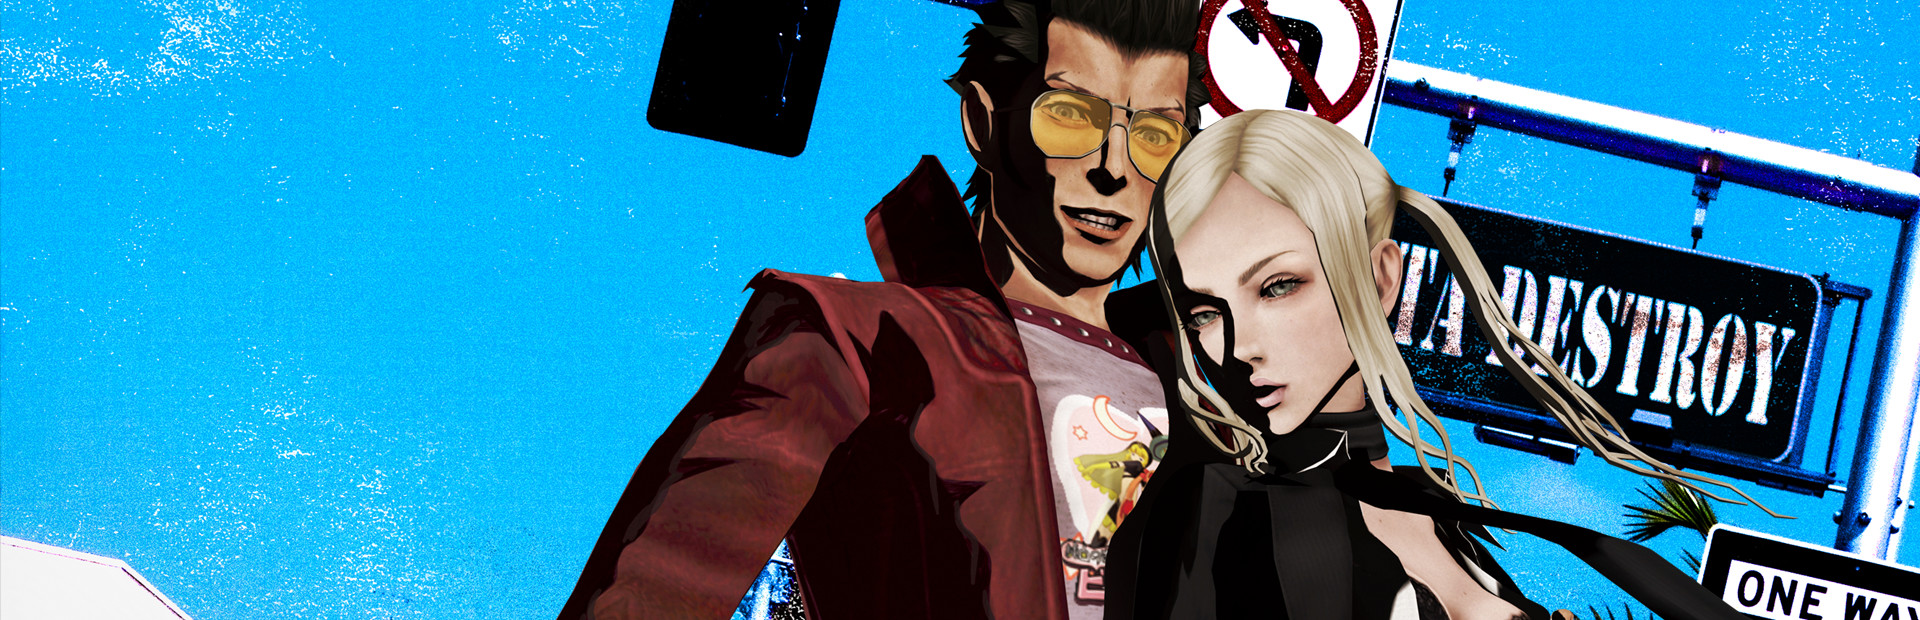 No More Heroes cover image